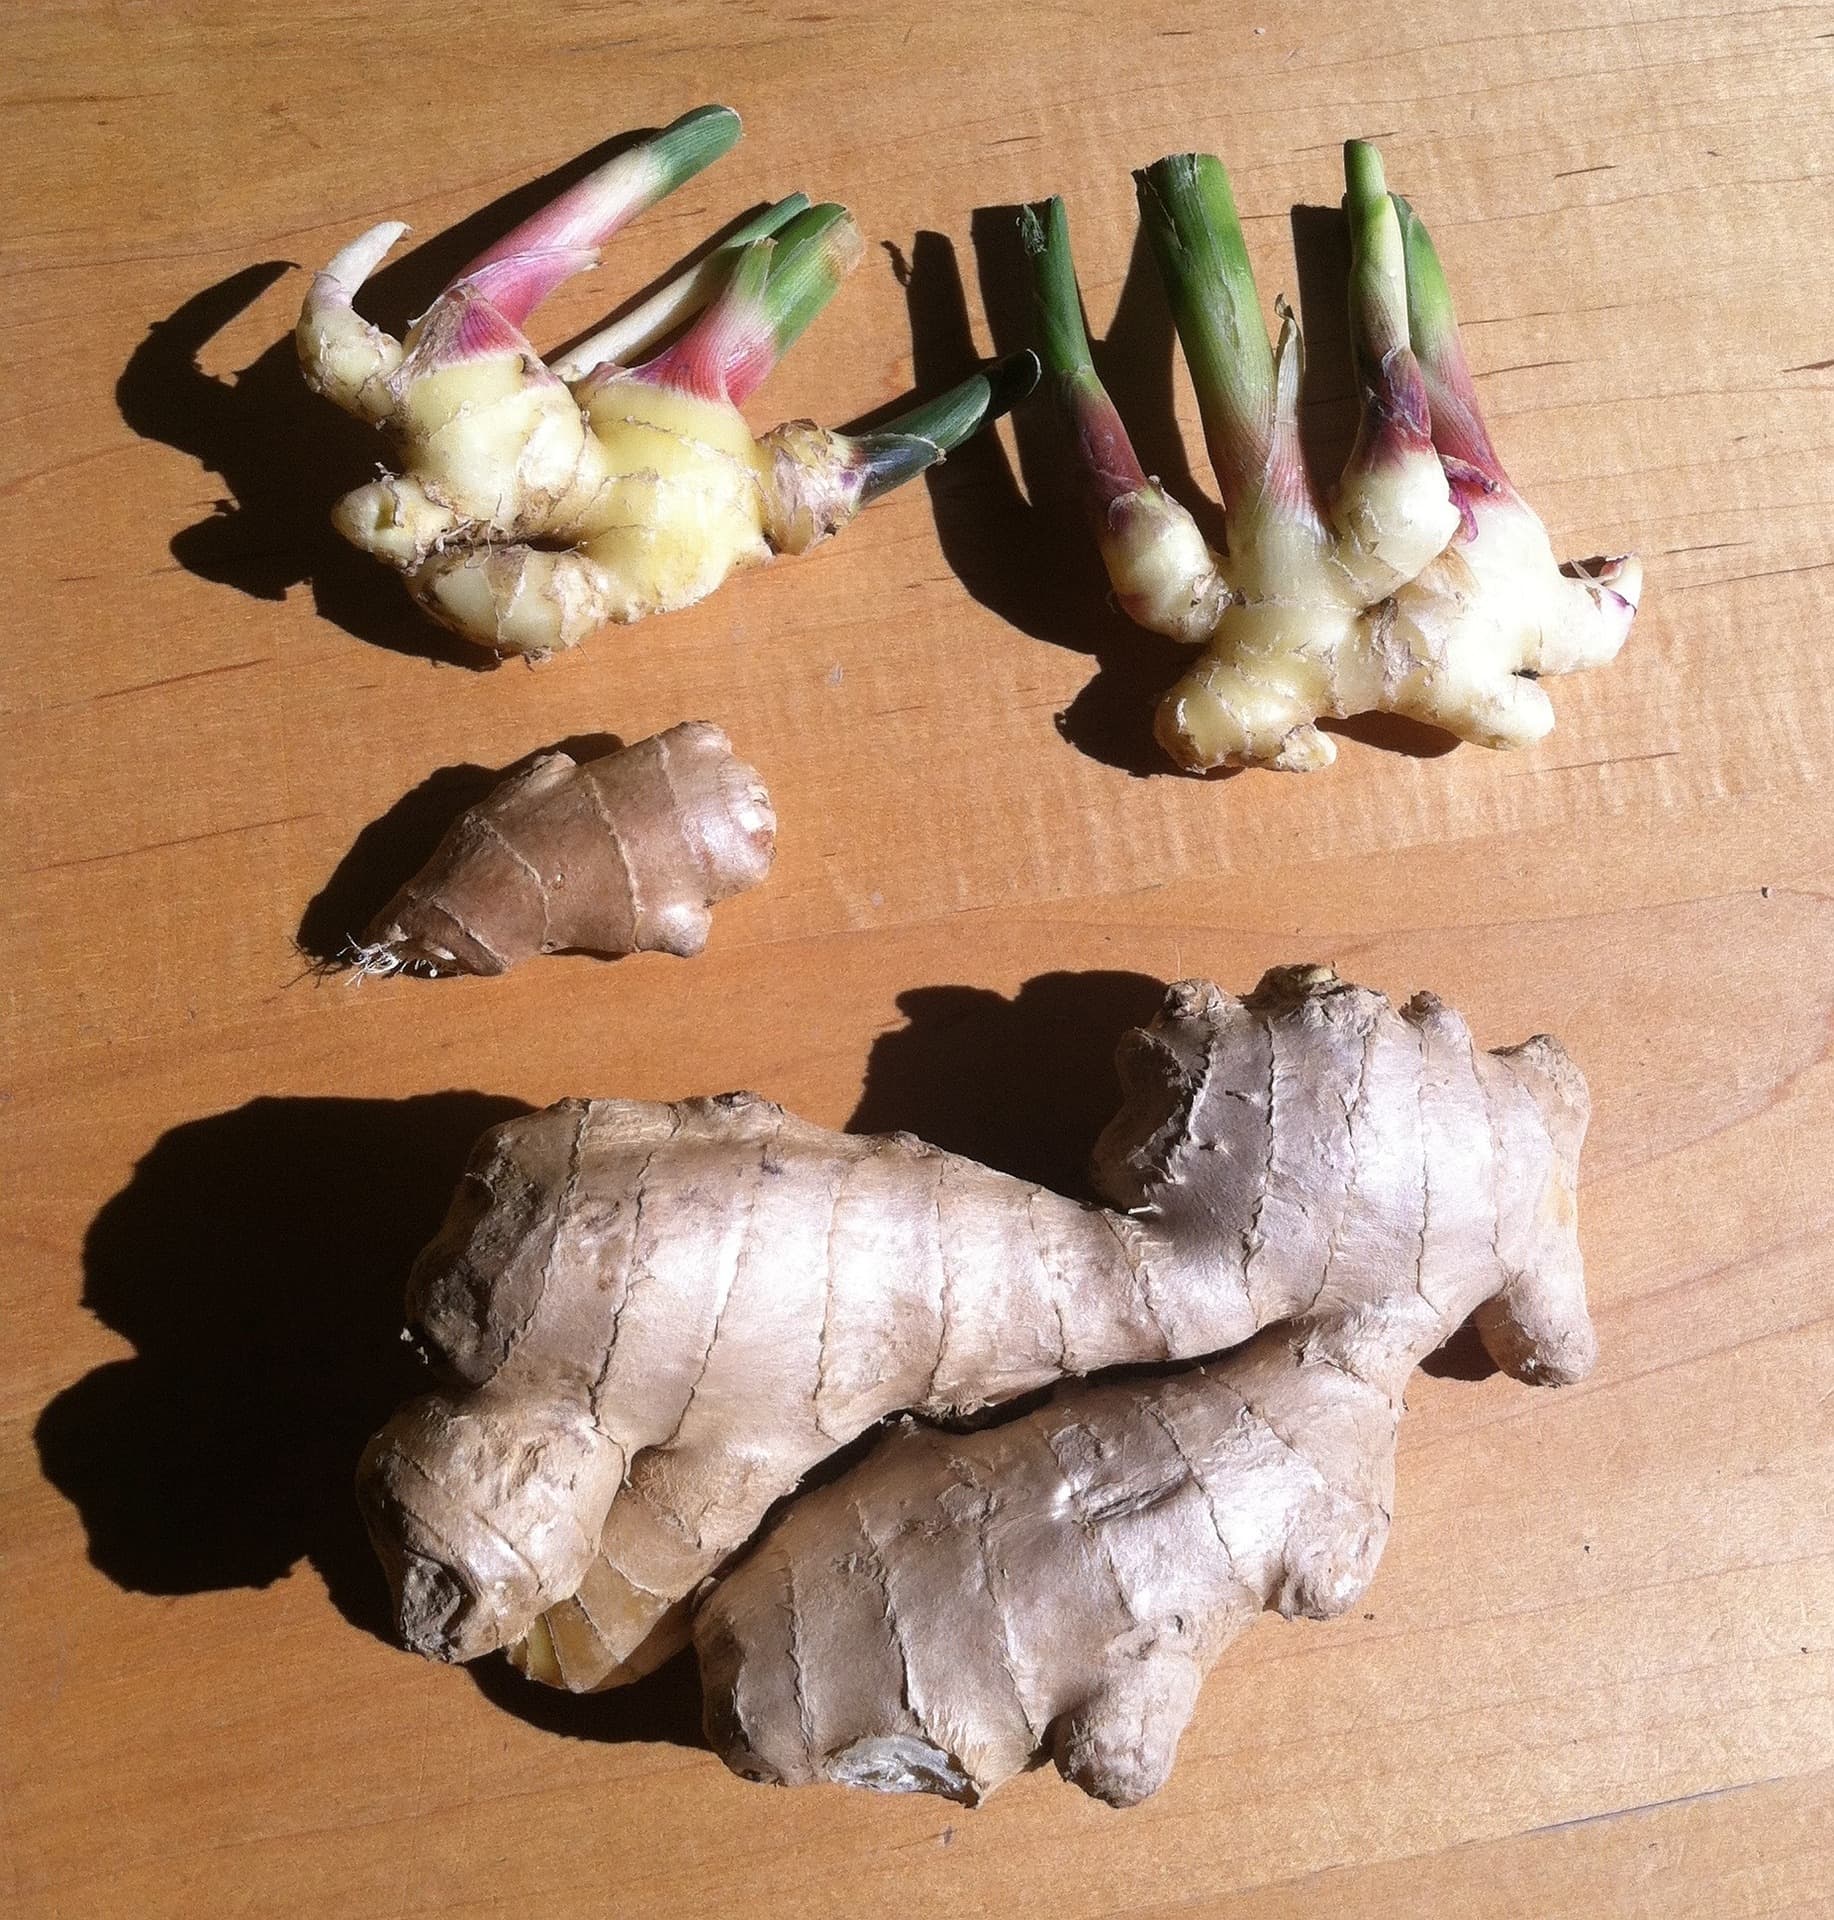 pieces of ginger on a table. Fresh ones with stems still attached and white roots at the top with older, dry-skinned ginger underneath